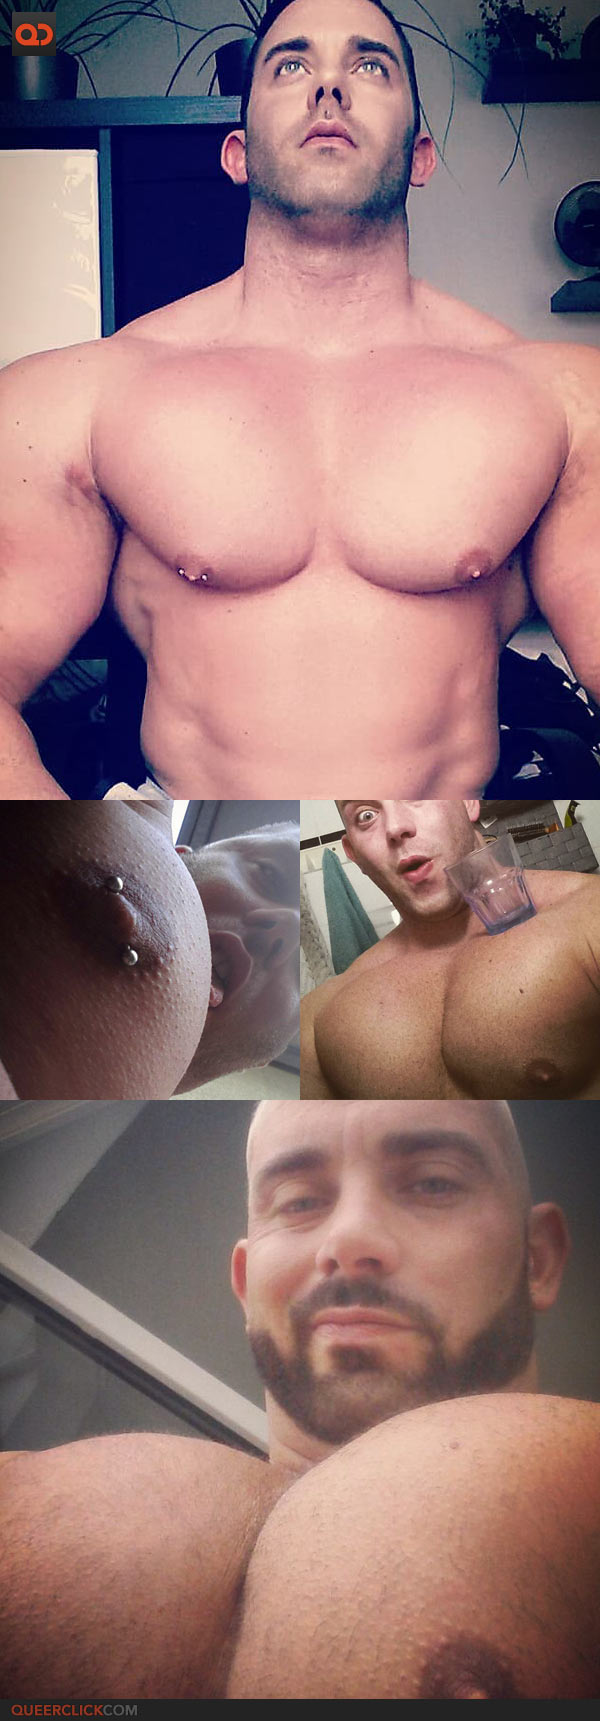 Ten “Pec”tacular Fitness Models From Instagram That You Need In Your Life This Week!